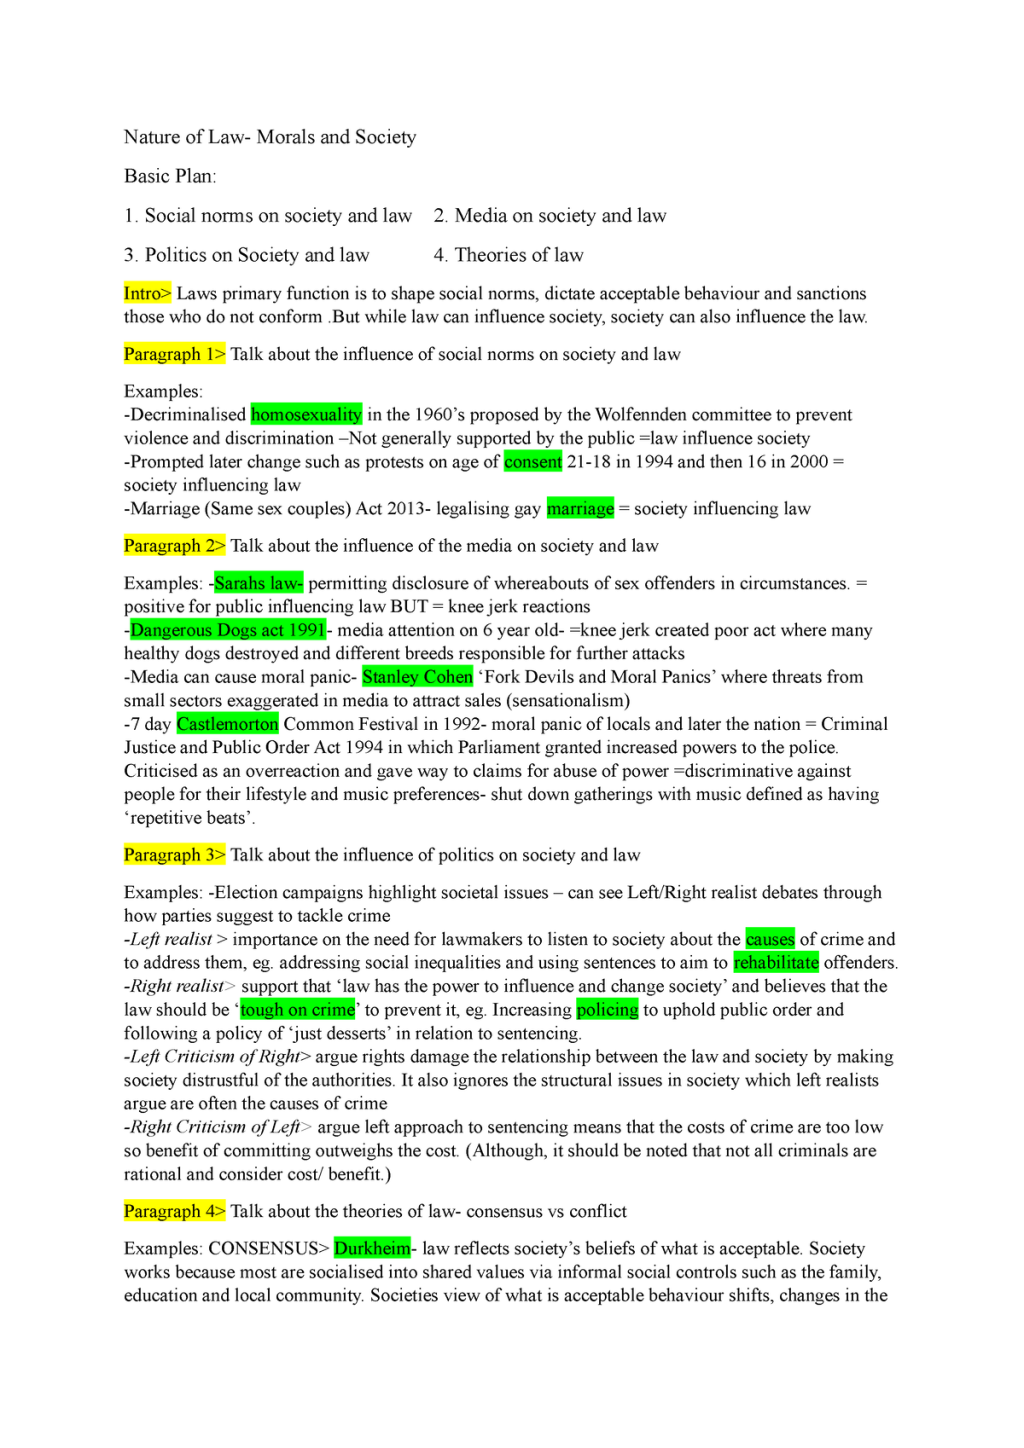 Picture of: Law and Society: Nature of law essay for A-level – Studocu